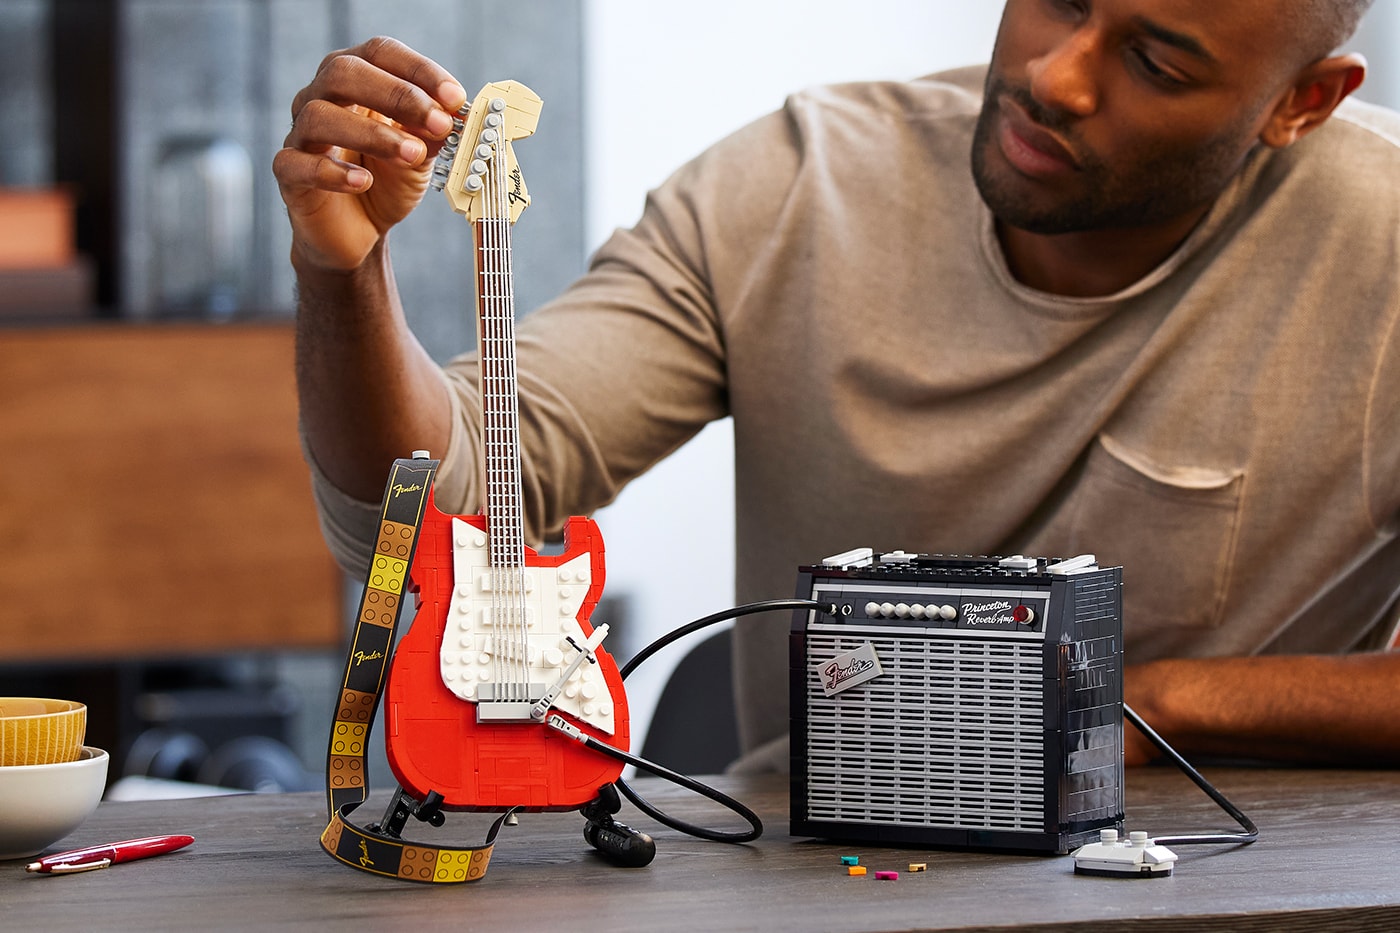 LEGO Introduces Fender Stratocaster Electric Guitar Set LEGO Ideas Music to Our Ears competition